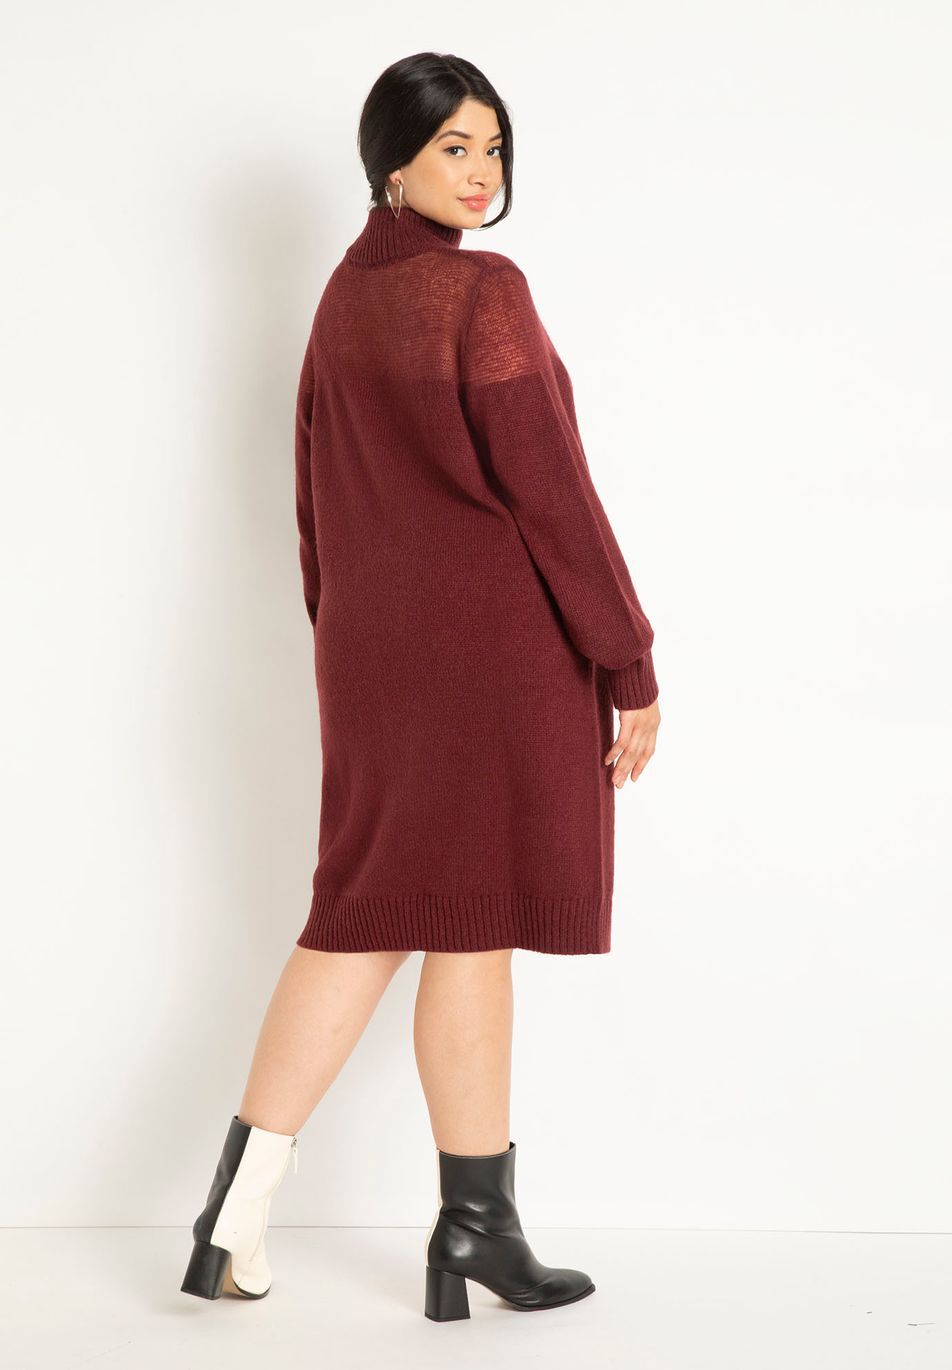 Sweater Dress With Sheer Panel